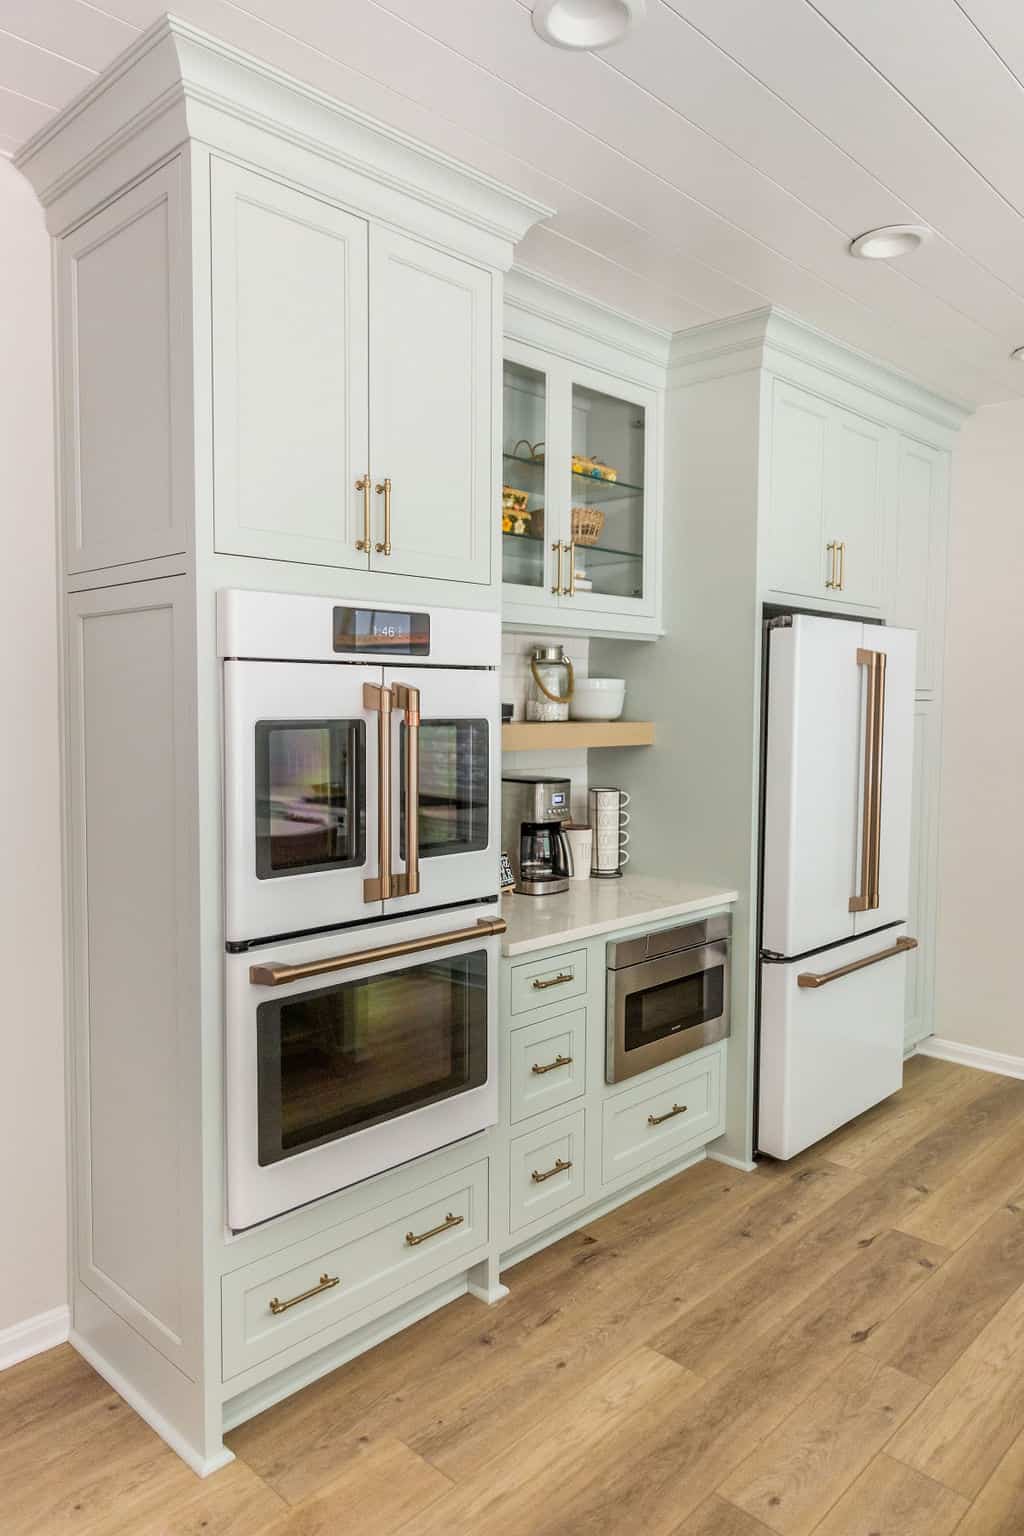 Nicholas Design Build | A modern kitchen with white cabinets, built-in appliances, and hardwood flooring.